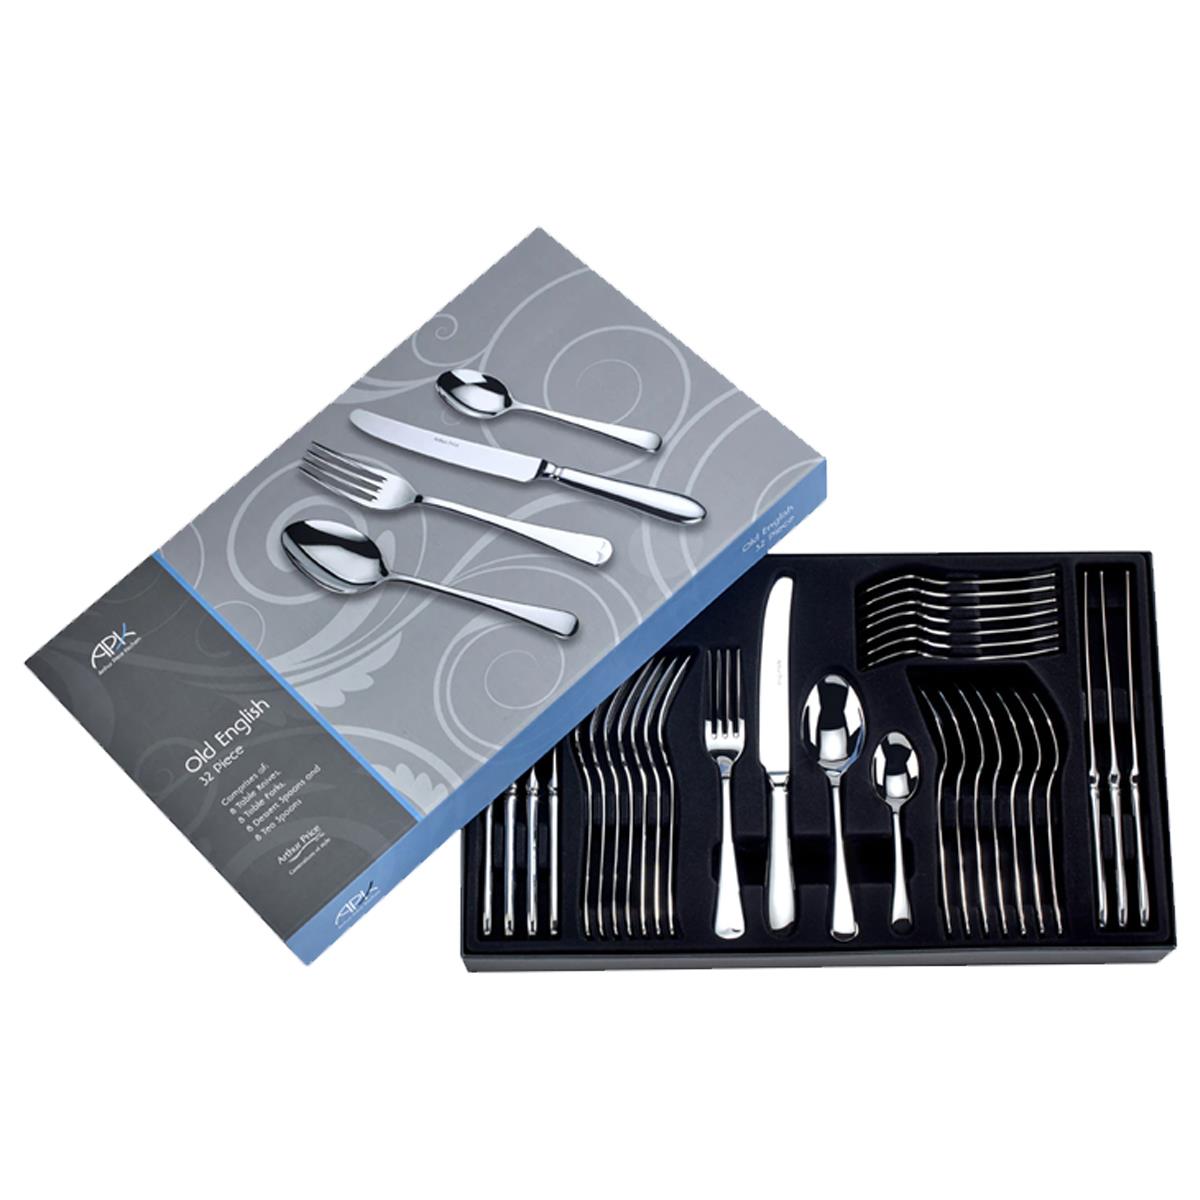 Arthur Price Old English 32 Piece Cutlery Set Questions & Answers